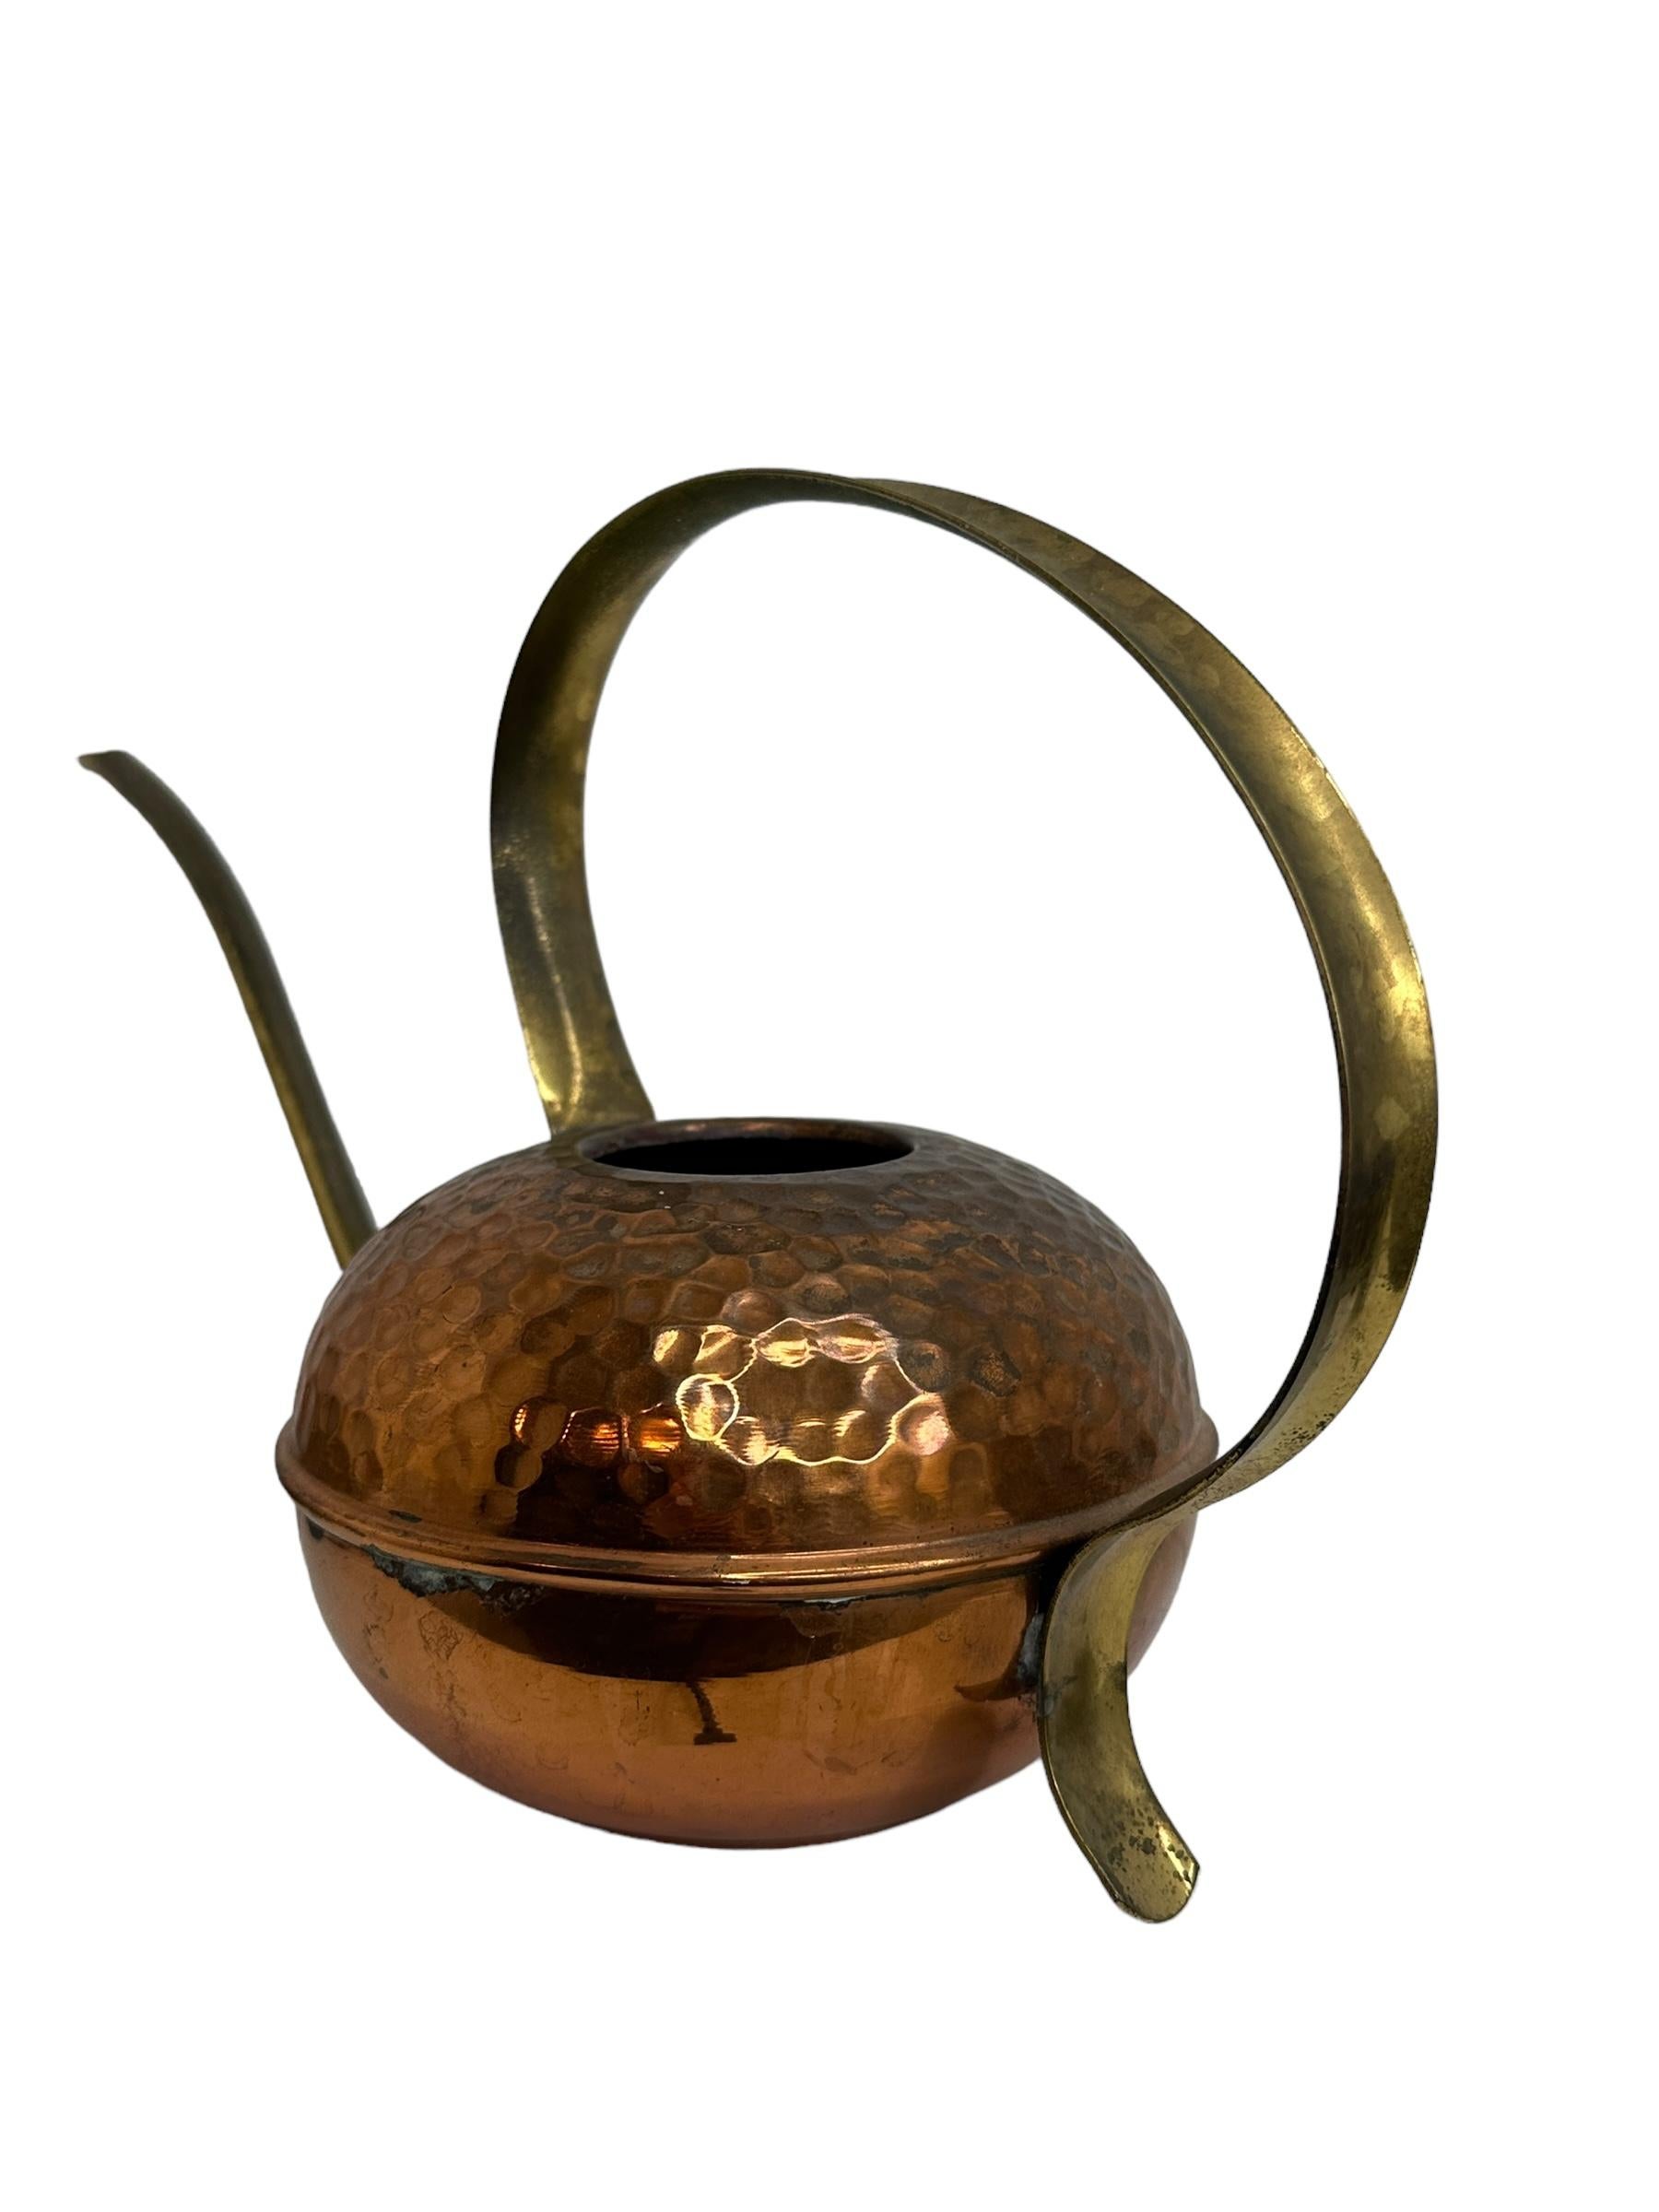 Vintage Mid-Century Modern Brass Copper Watering Can, 1950s For Sale 1